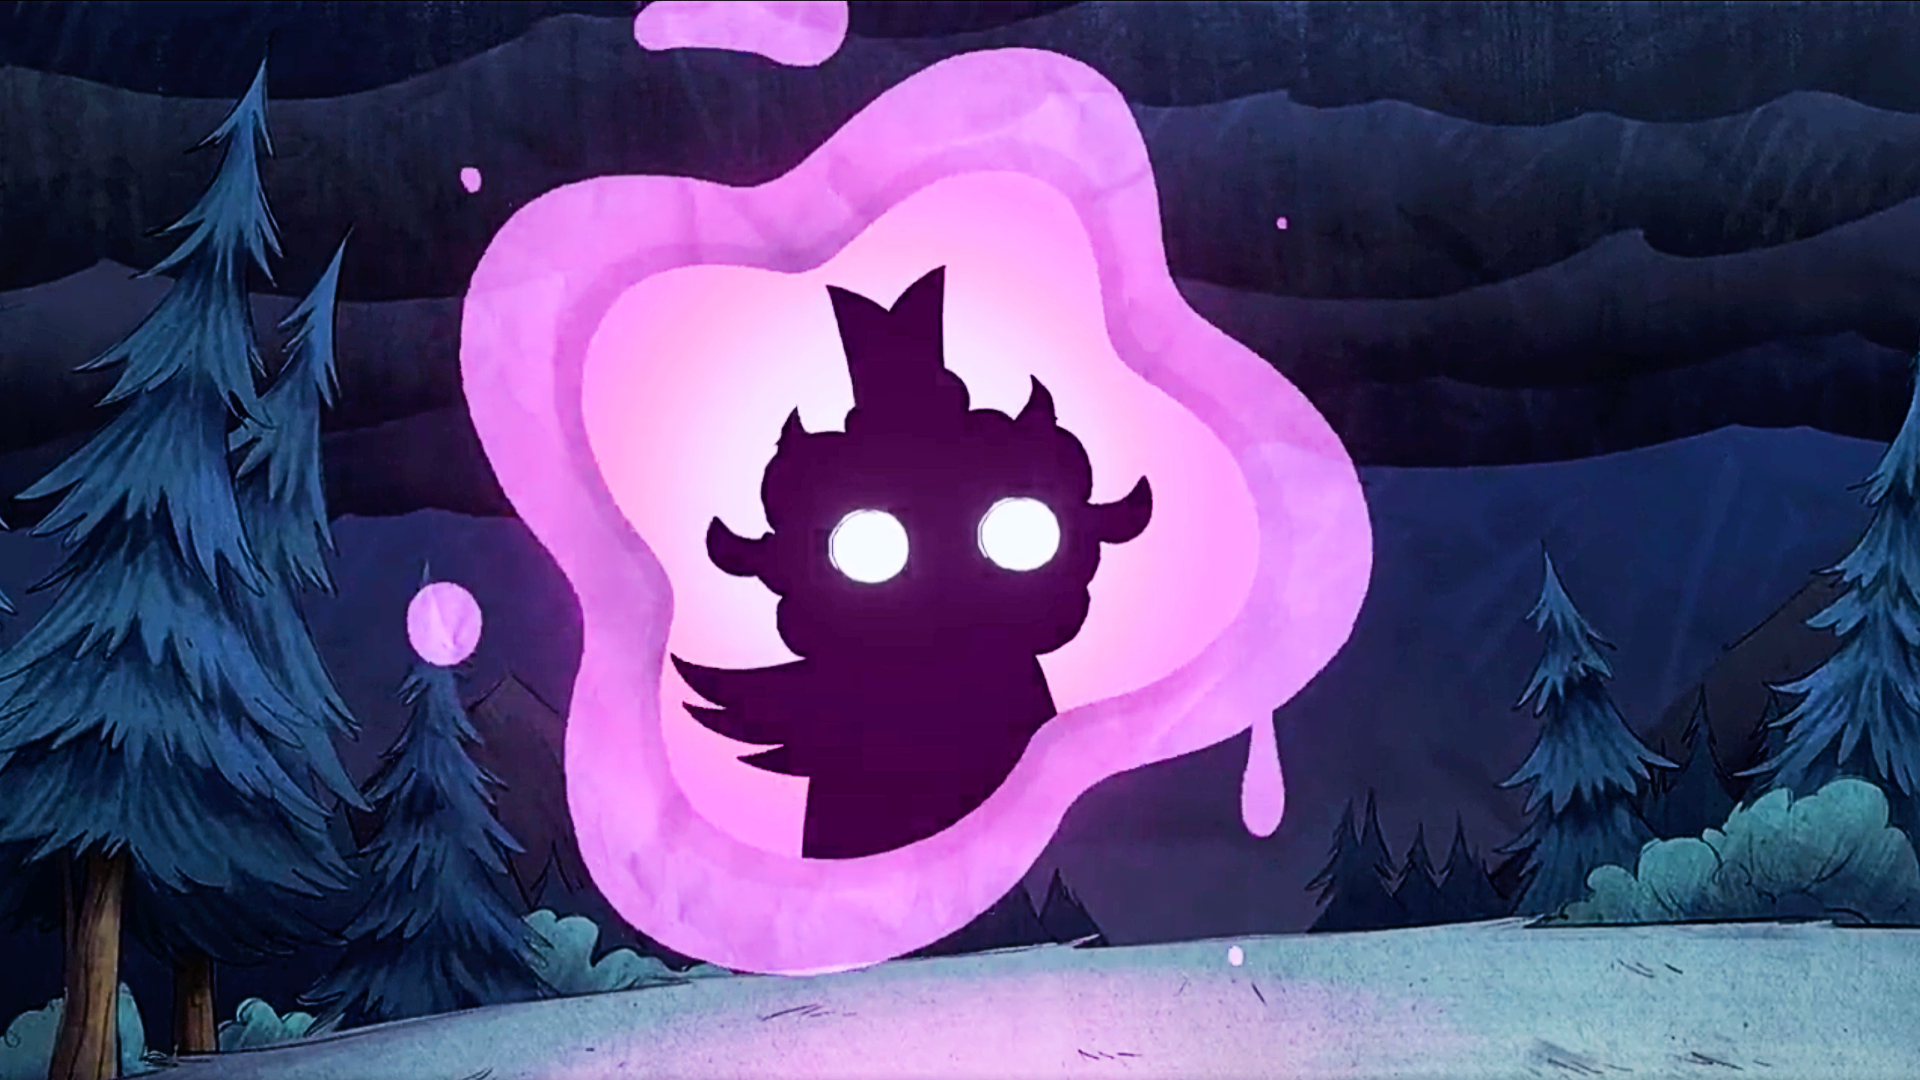 Cult of the Lamb and Don't Starve Together team up for a horrifying  collaboration